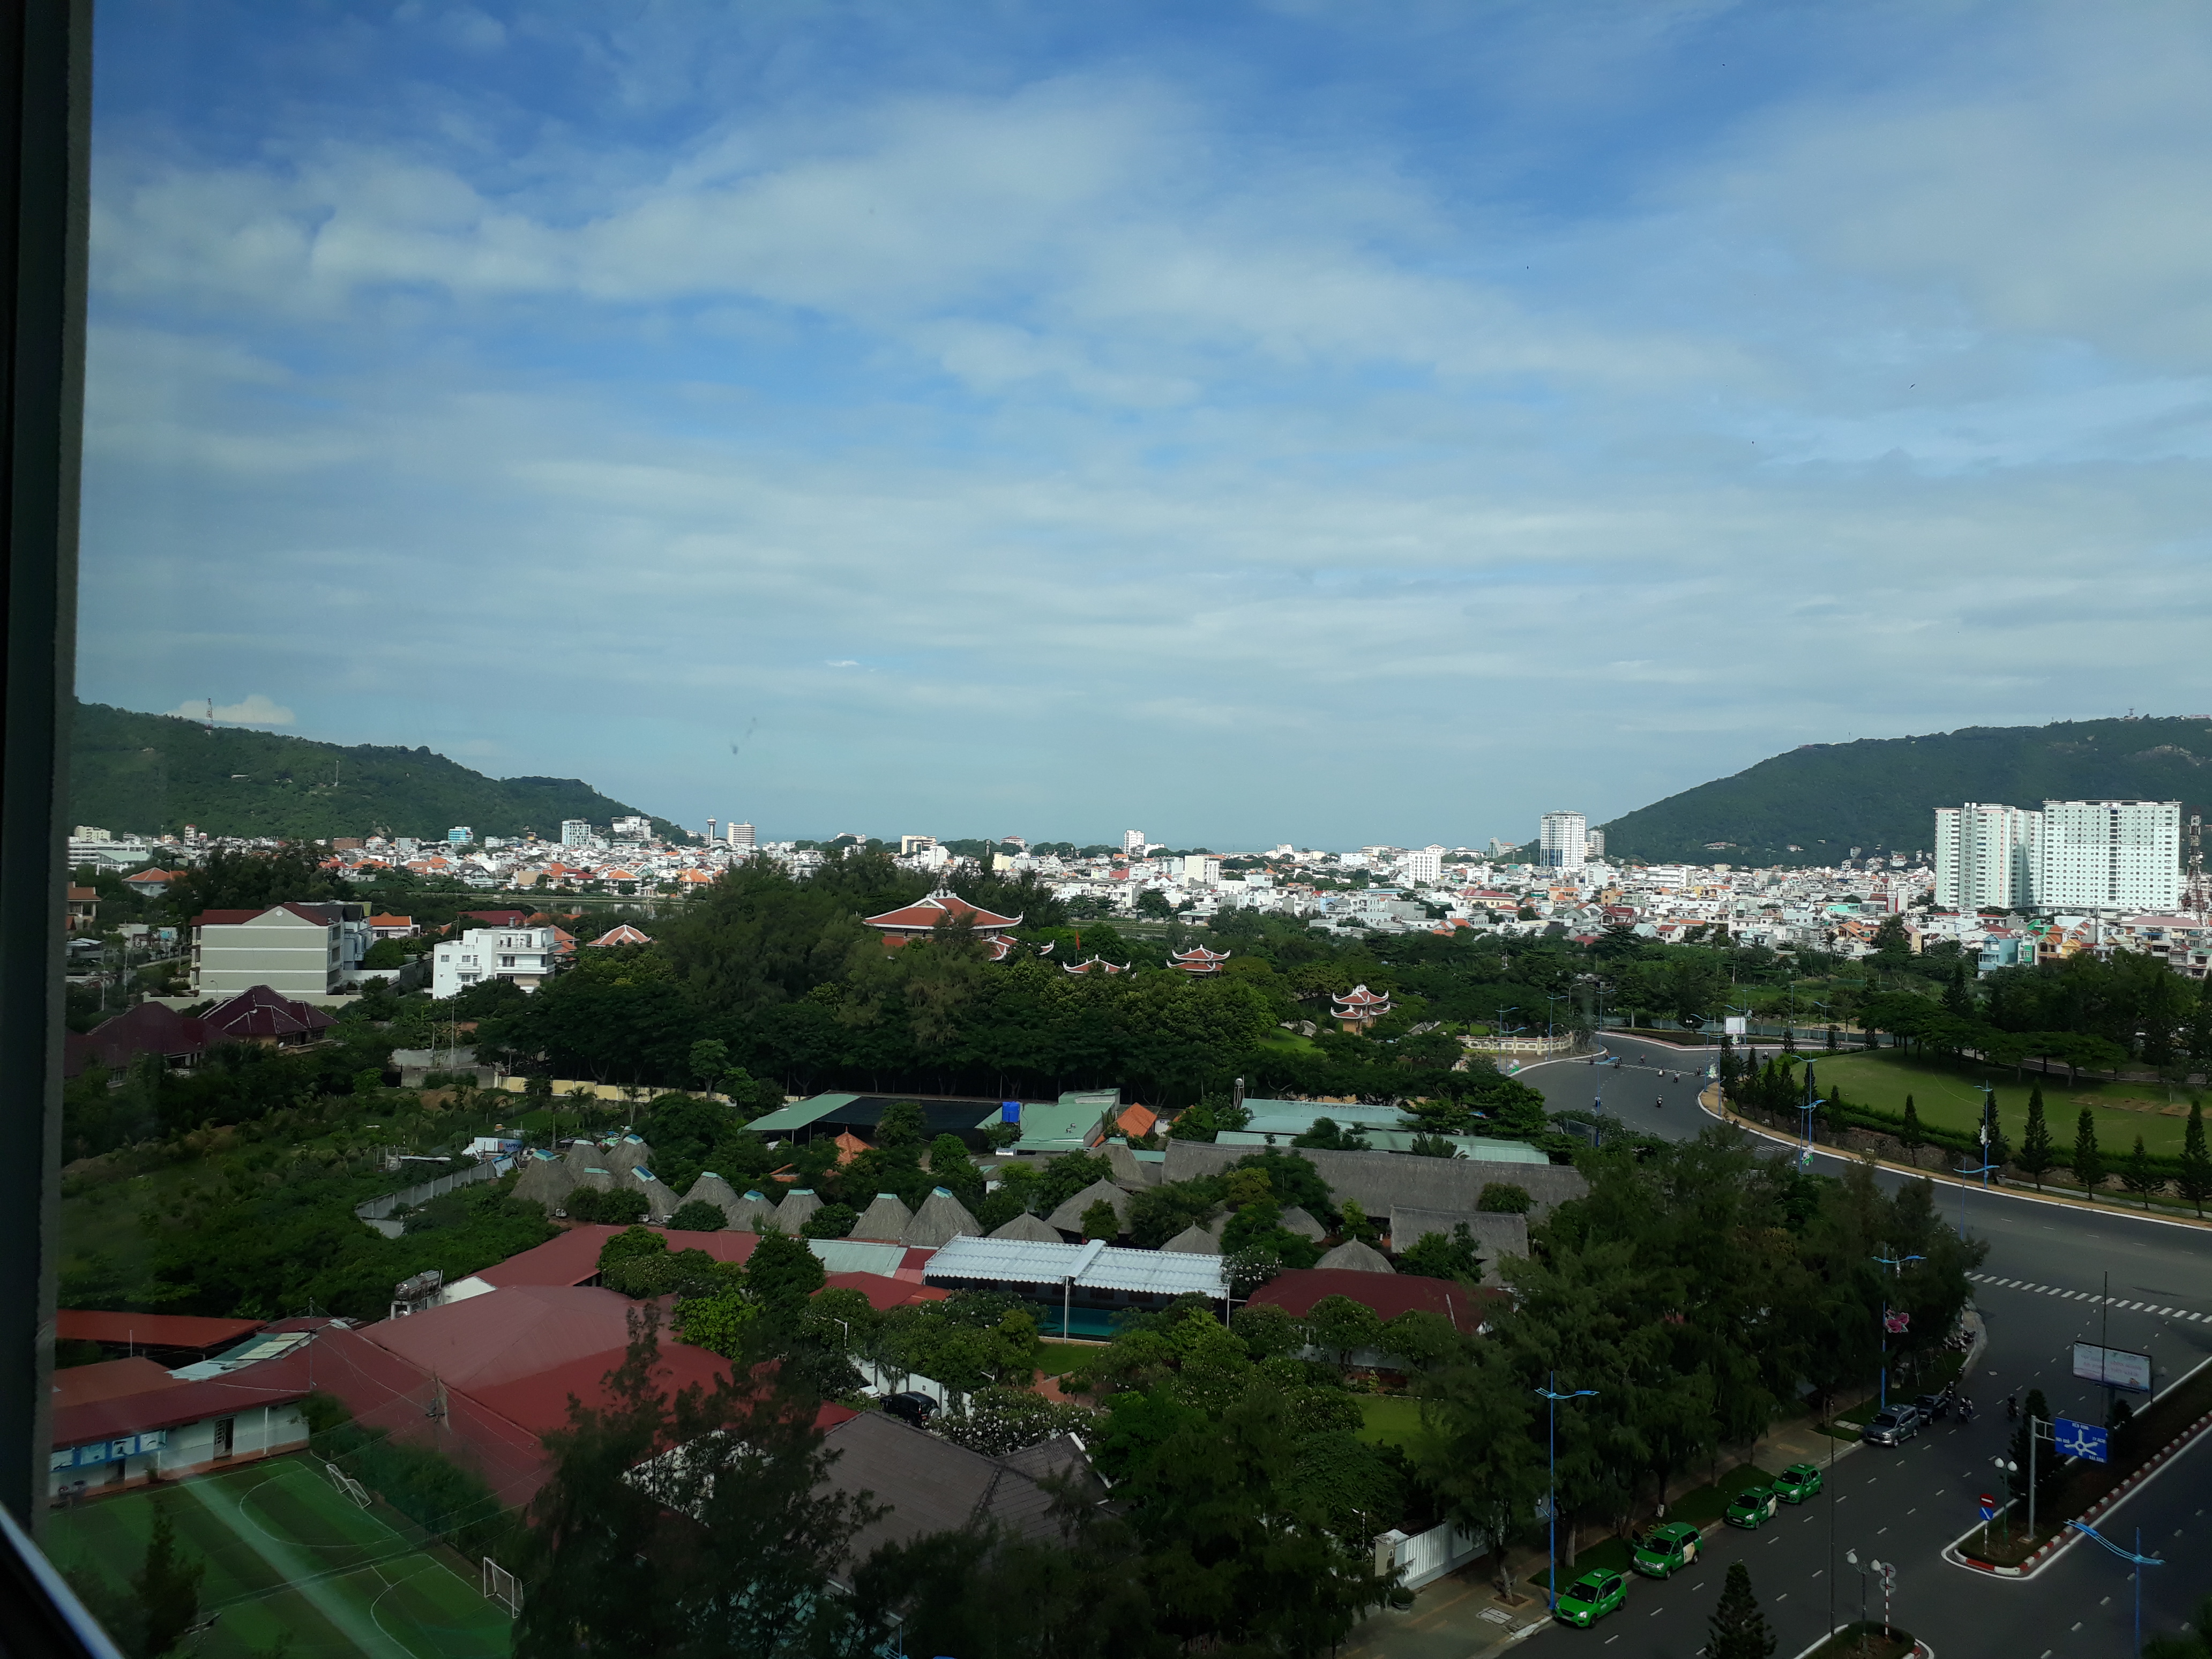 ba ria vung tau resort property market largely untapped